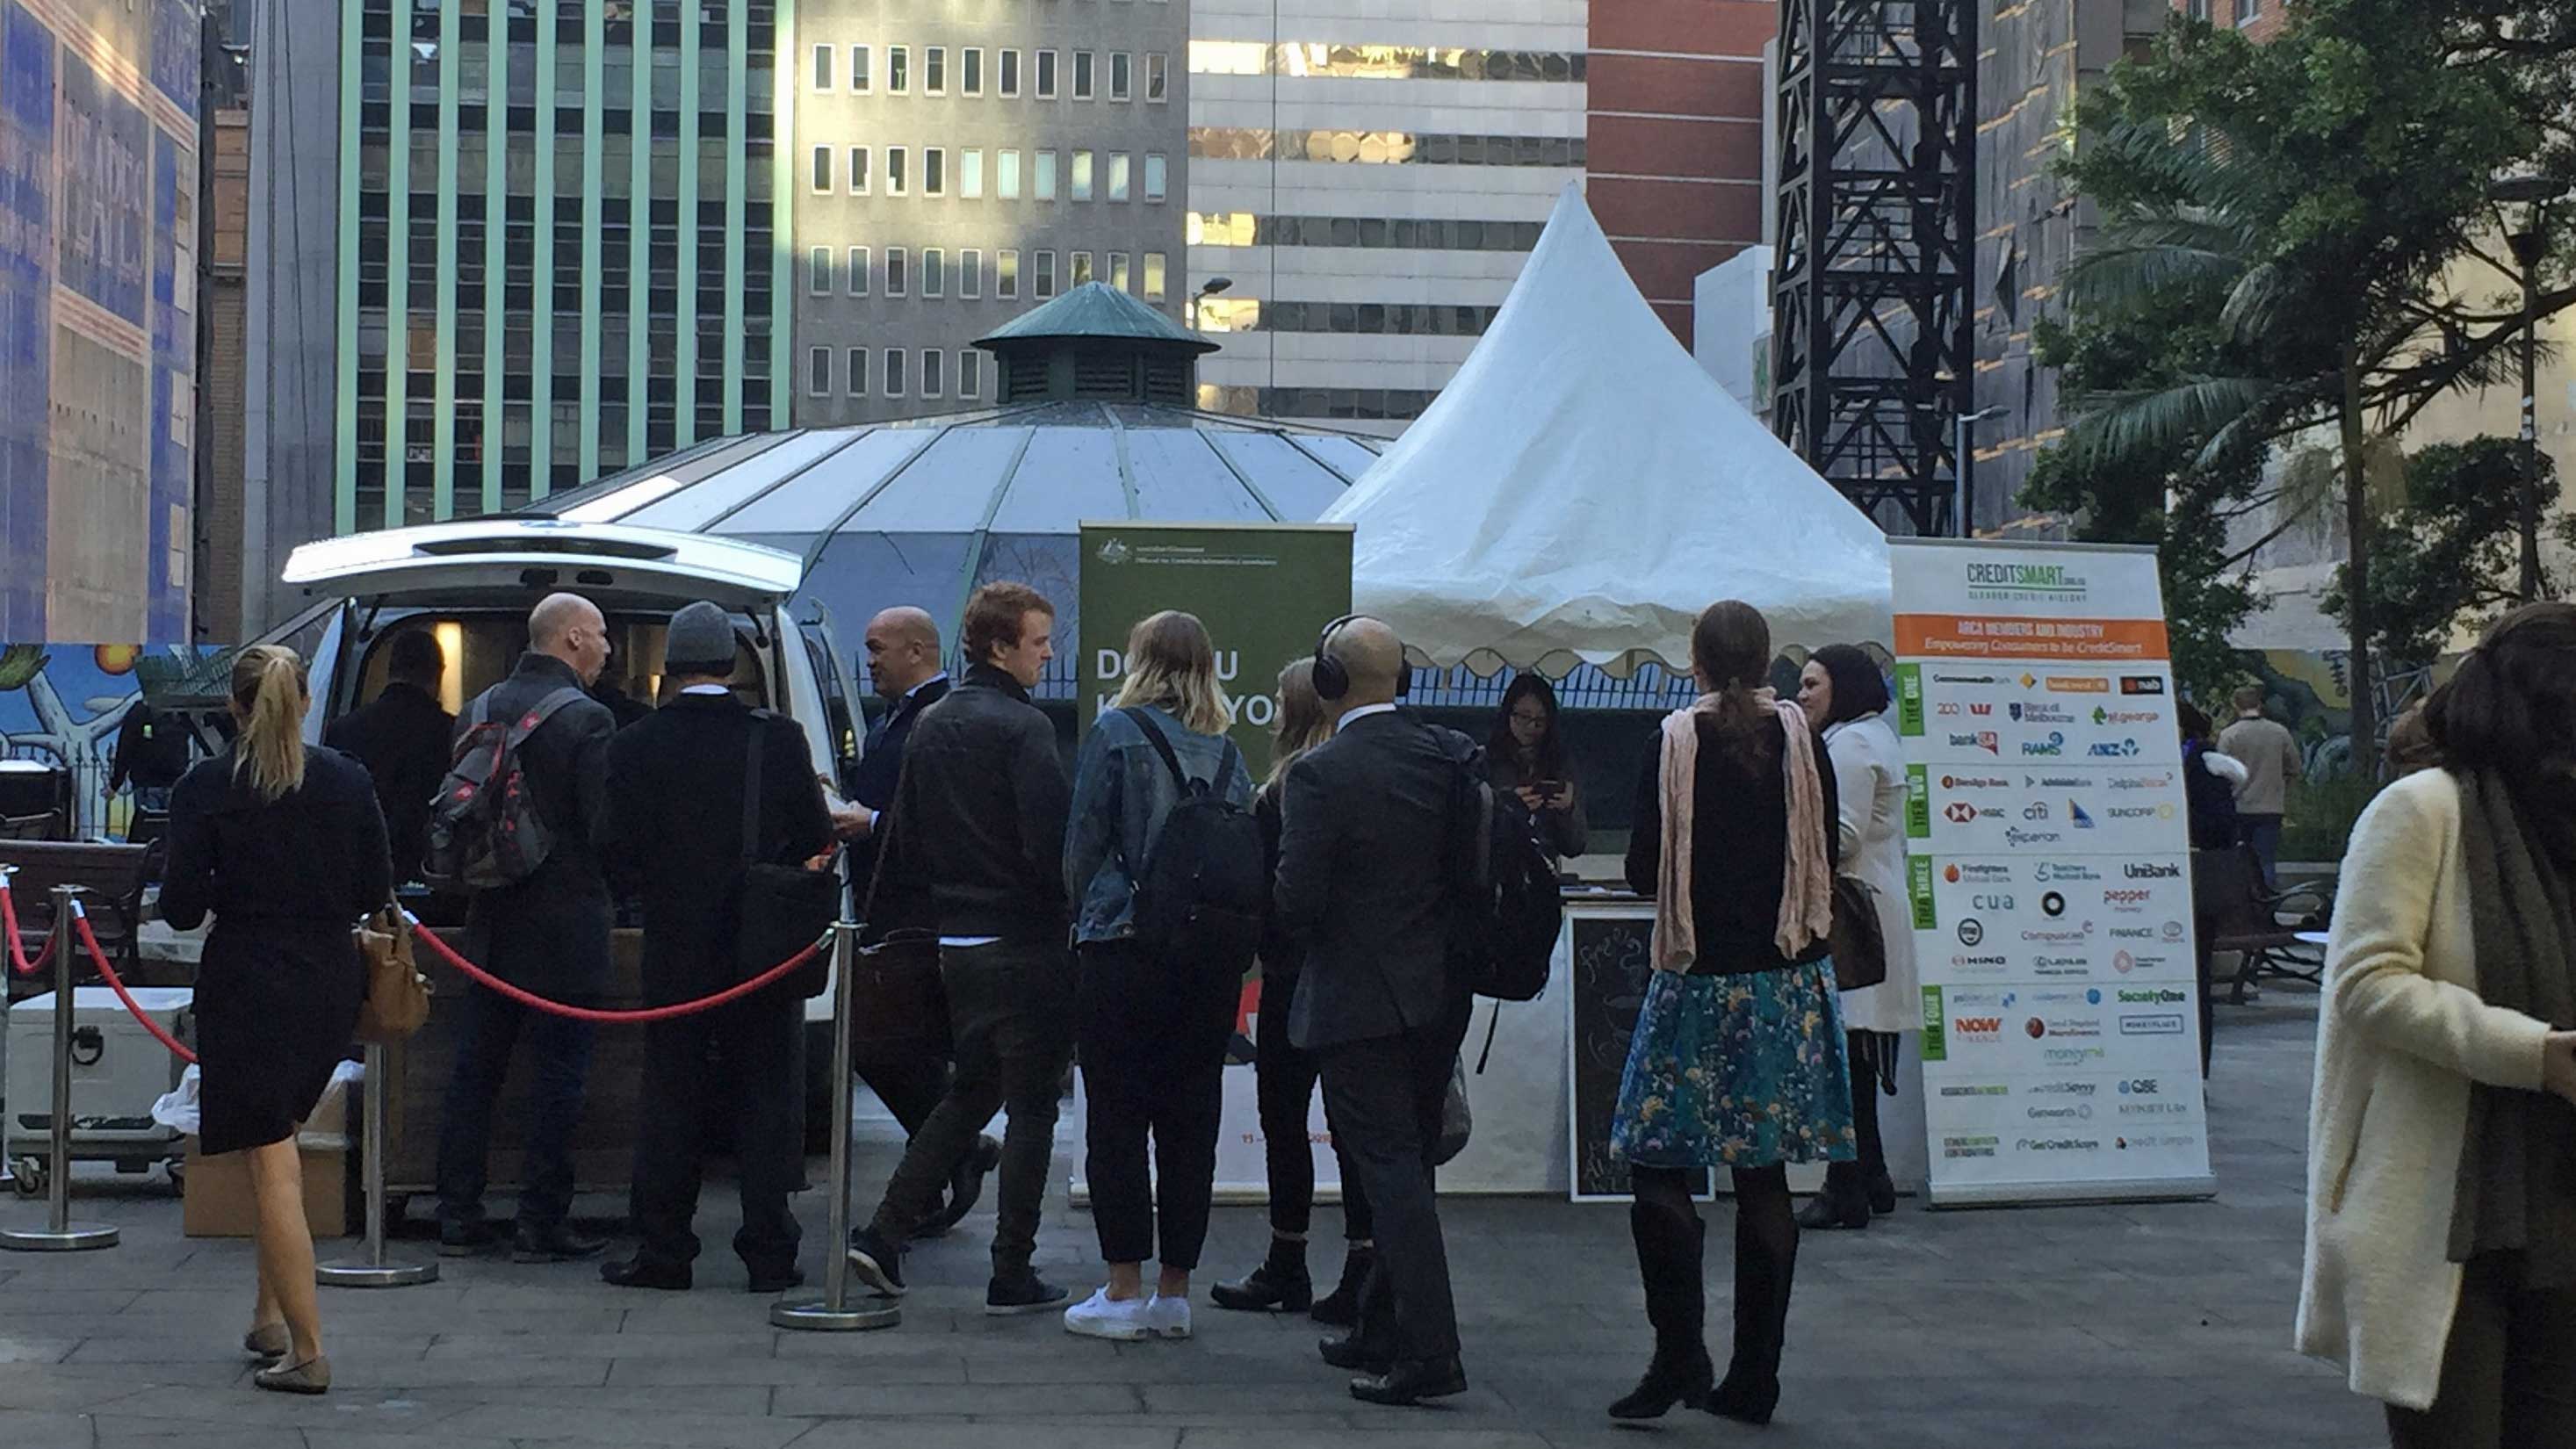 A group of people queing at a CreditSmart stand outside